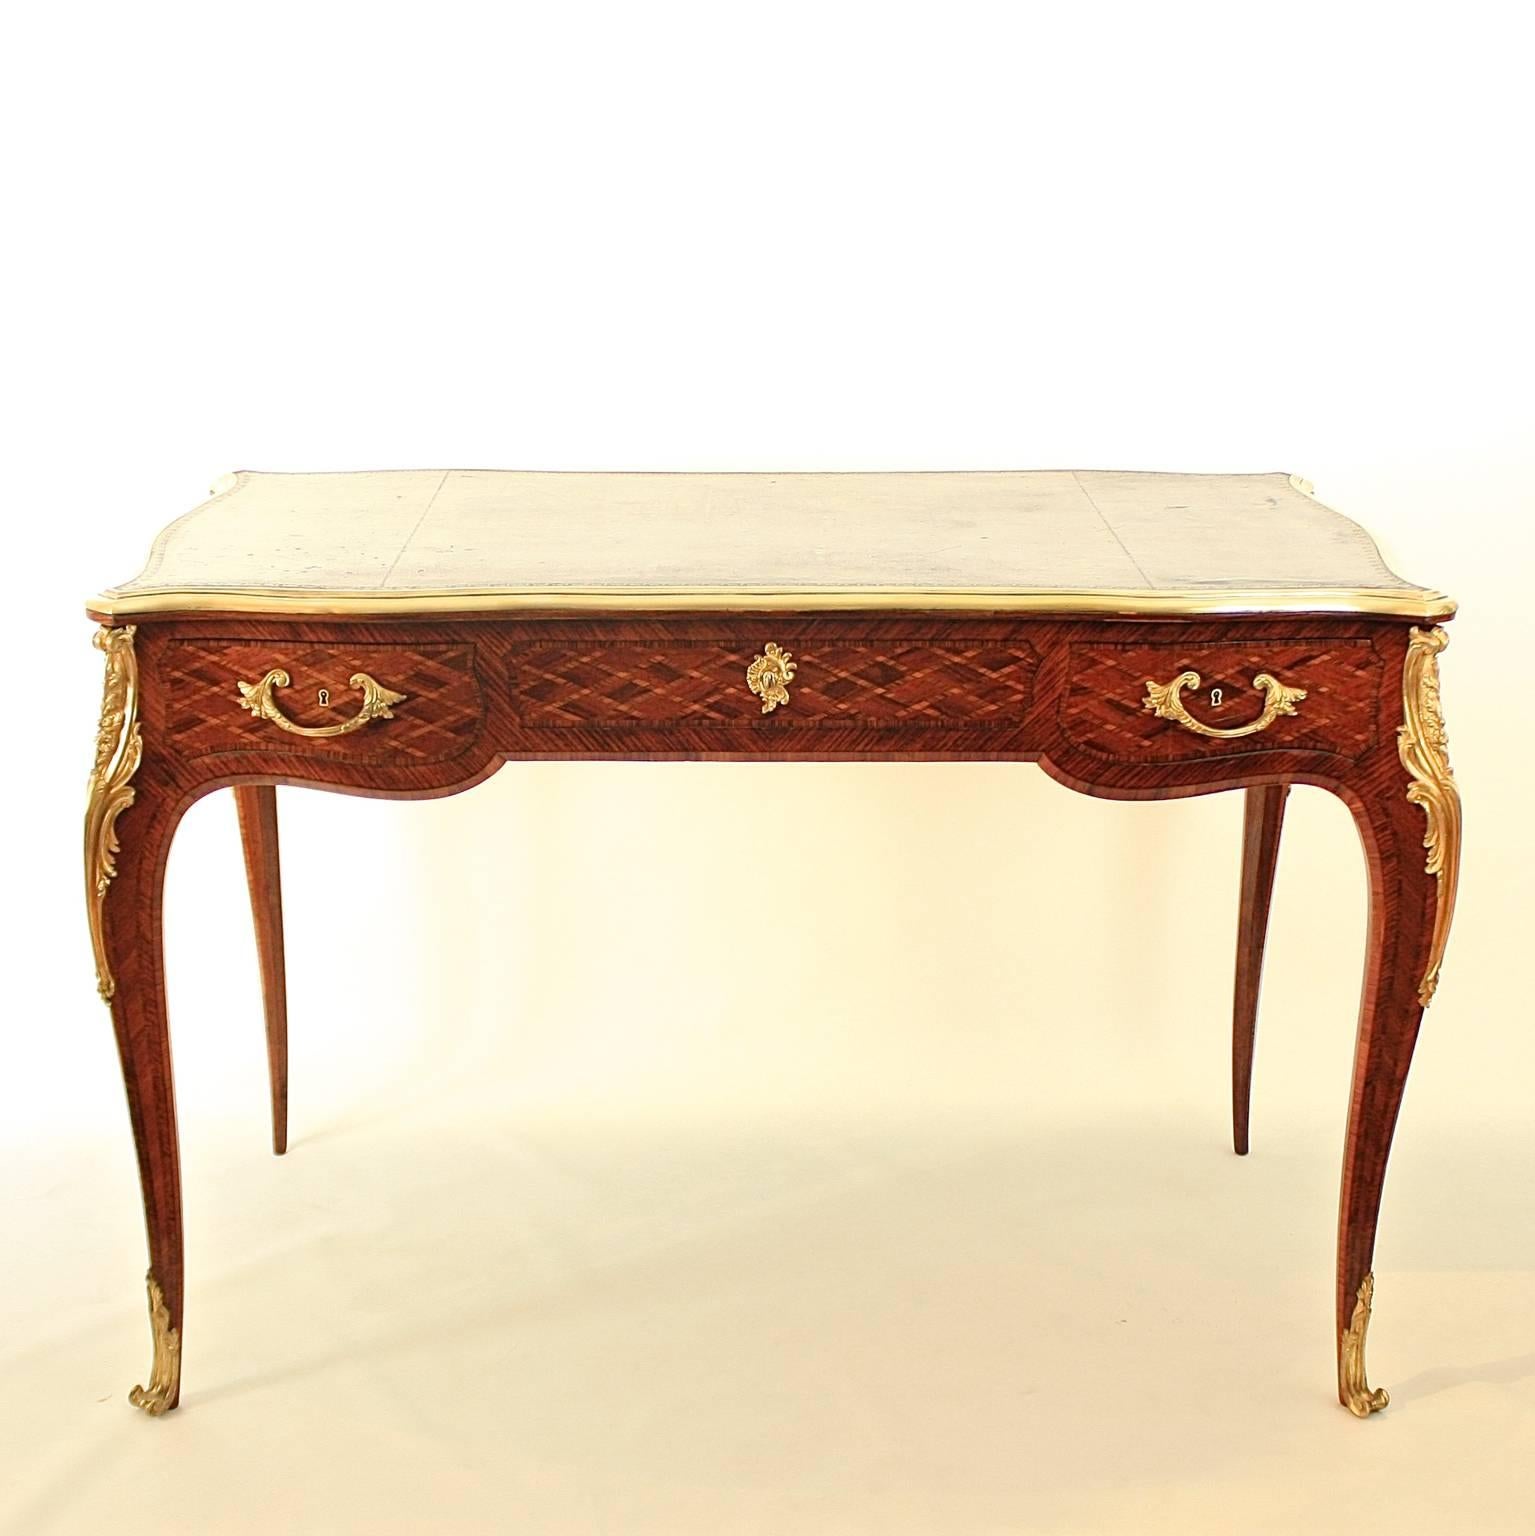 A 19th century Louis XV style gilt bronze mounted marquetry bureau plat, with a brass banded tooled serpentine brown leather top with molded edge above three frieze drawers, each finely inlaid with trellis parquetry, the back decorated conformingly